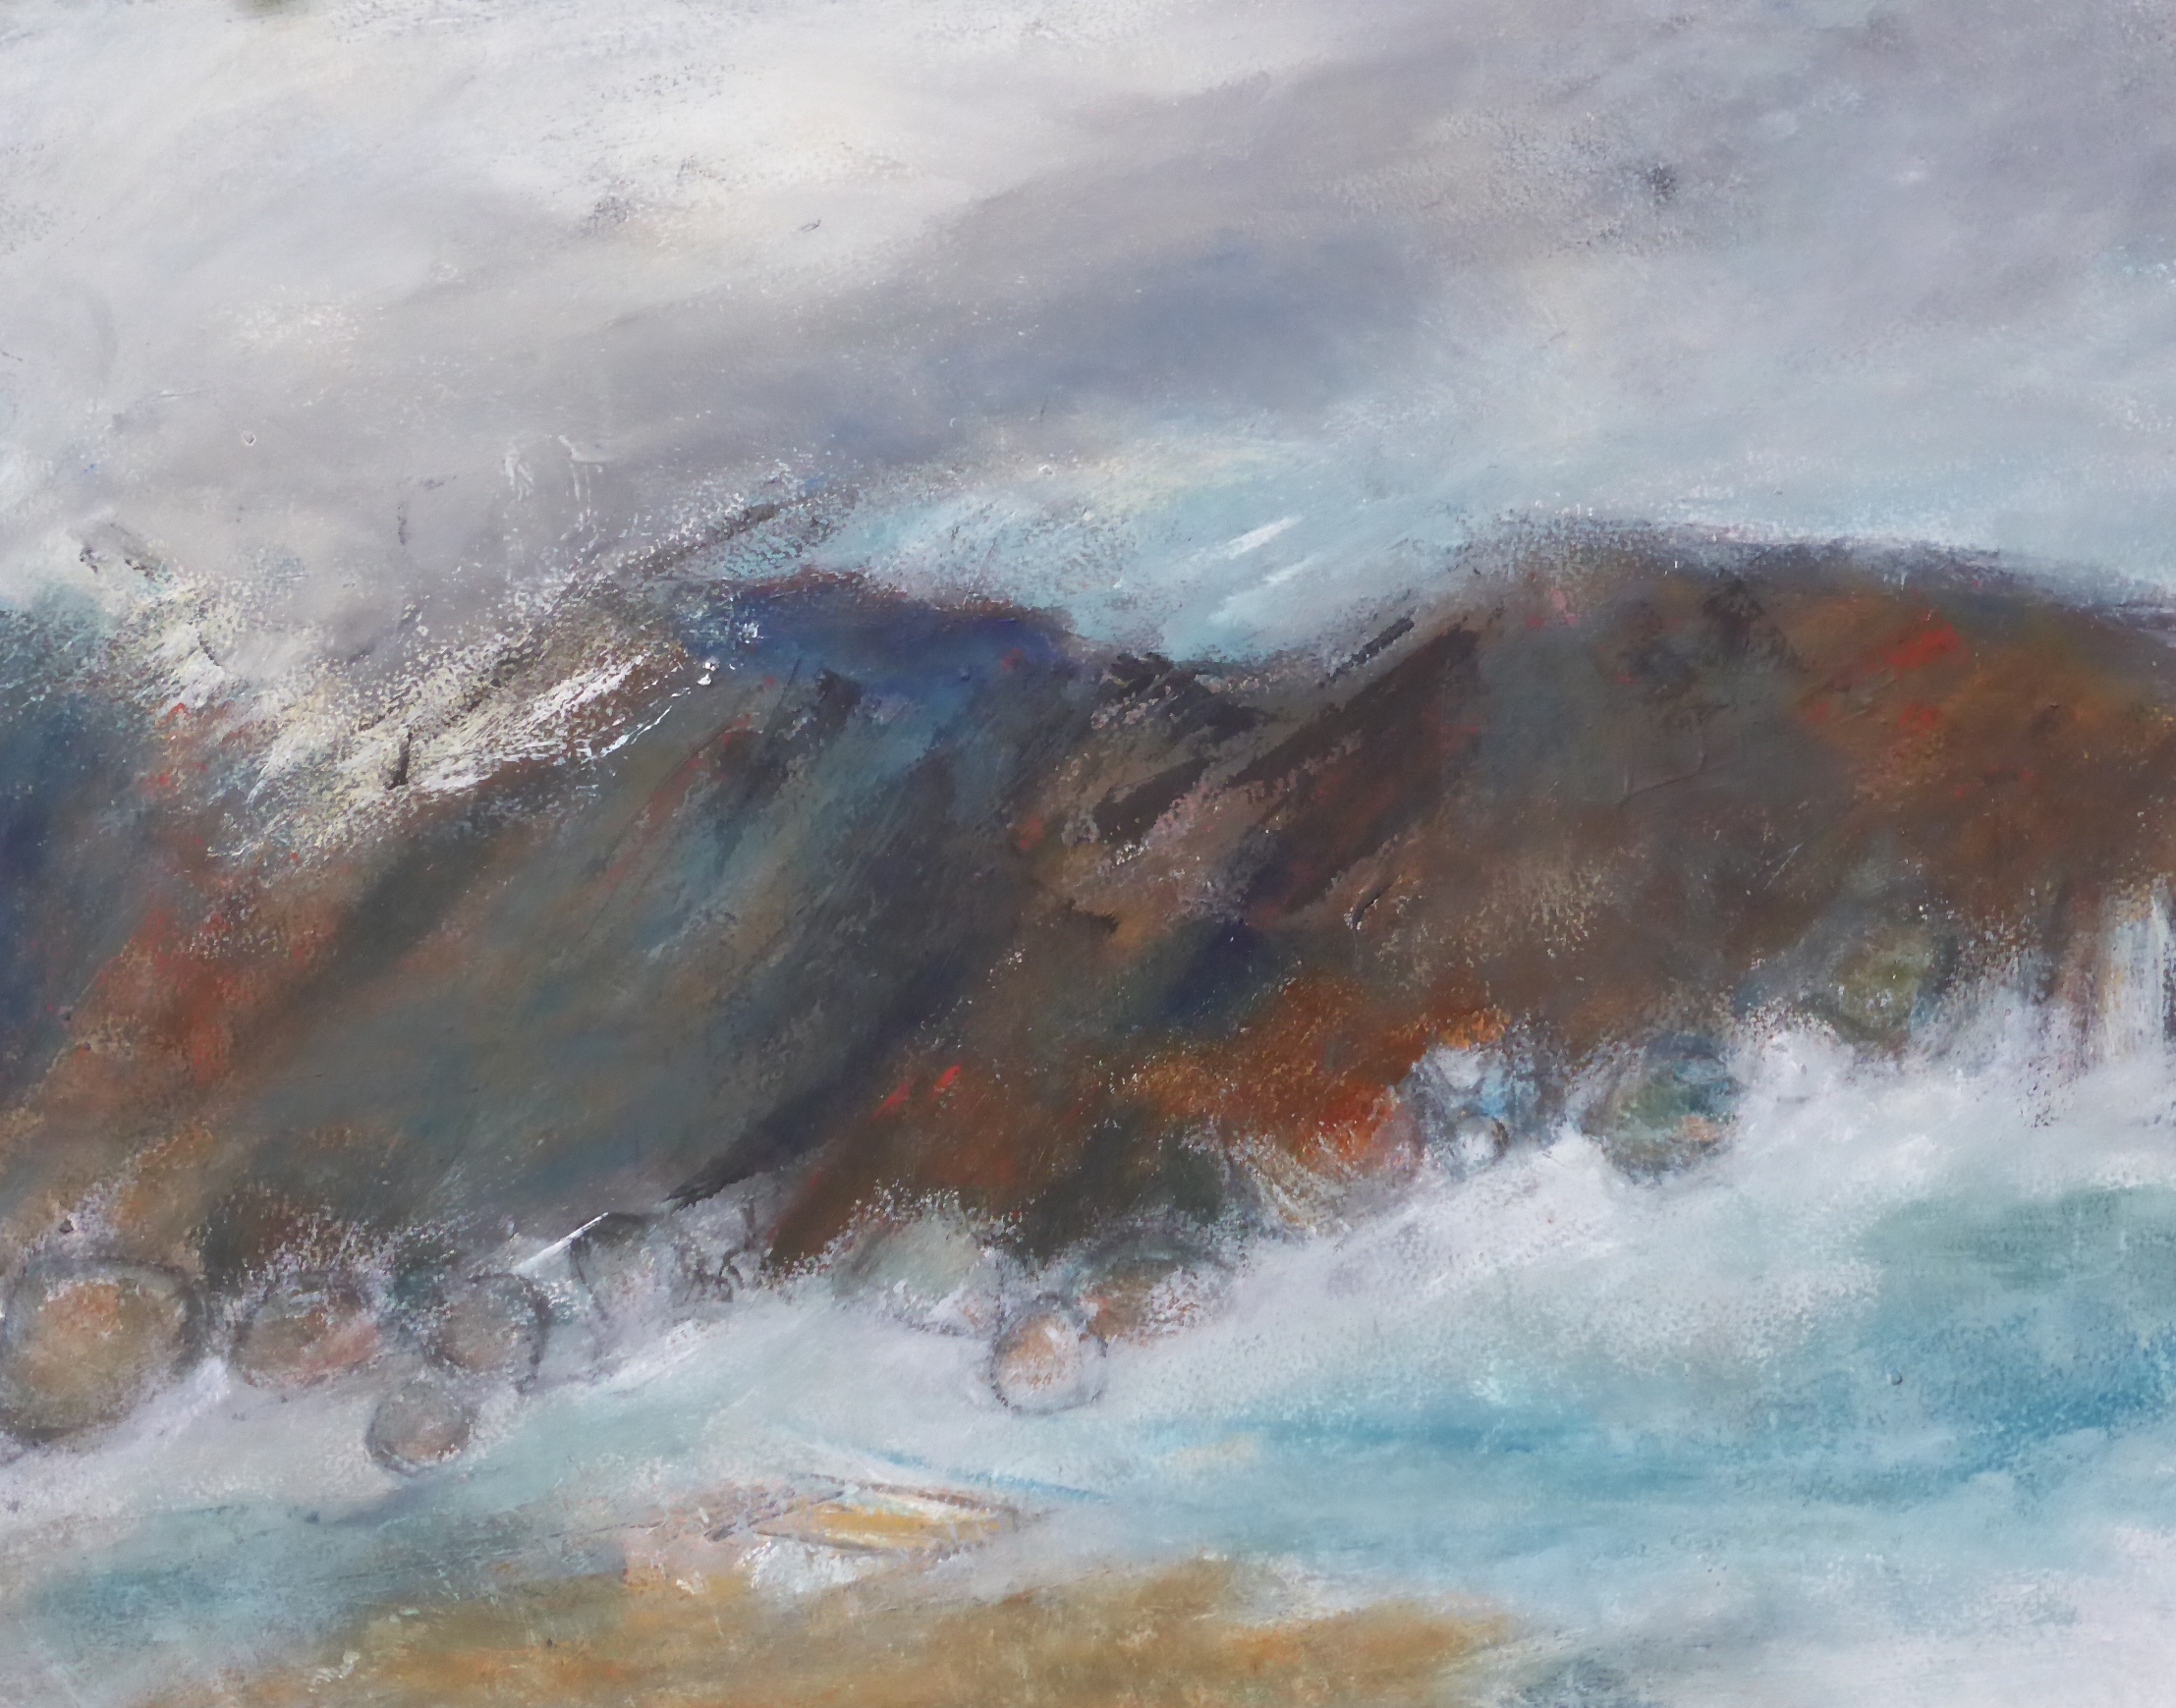 Porthcurno - Rushing Tide, Mixed Media on Paper, 61 x 69cm